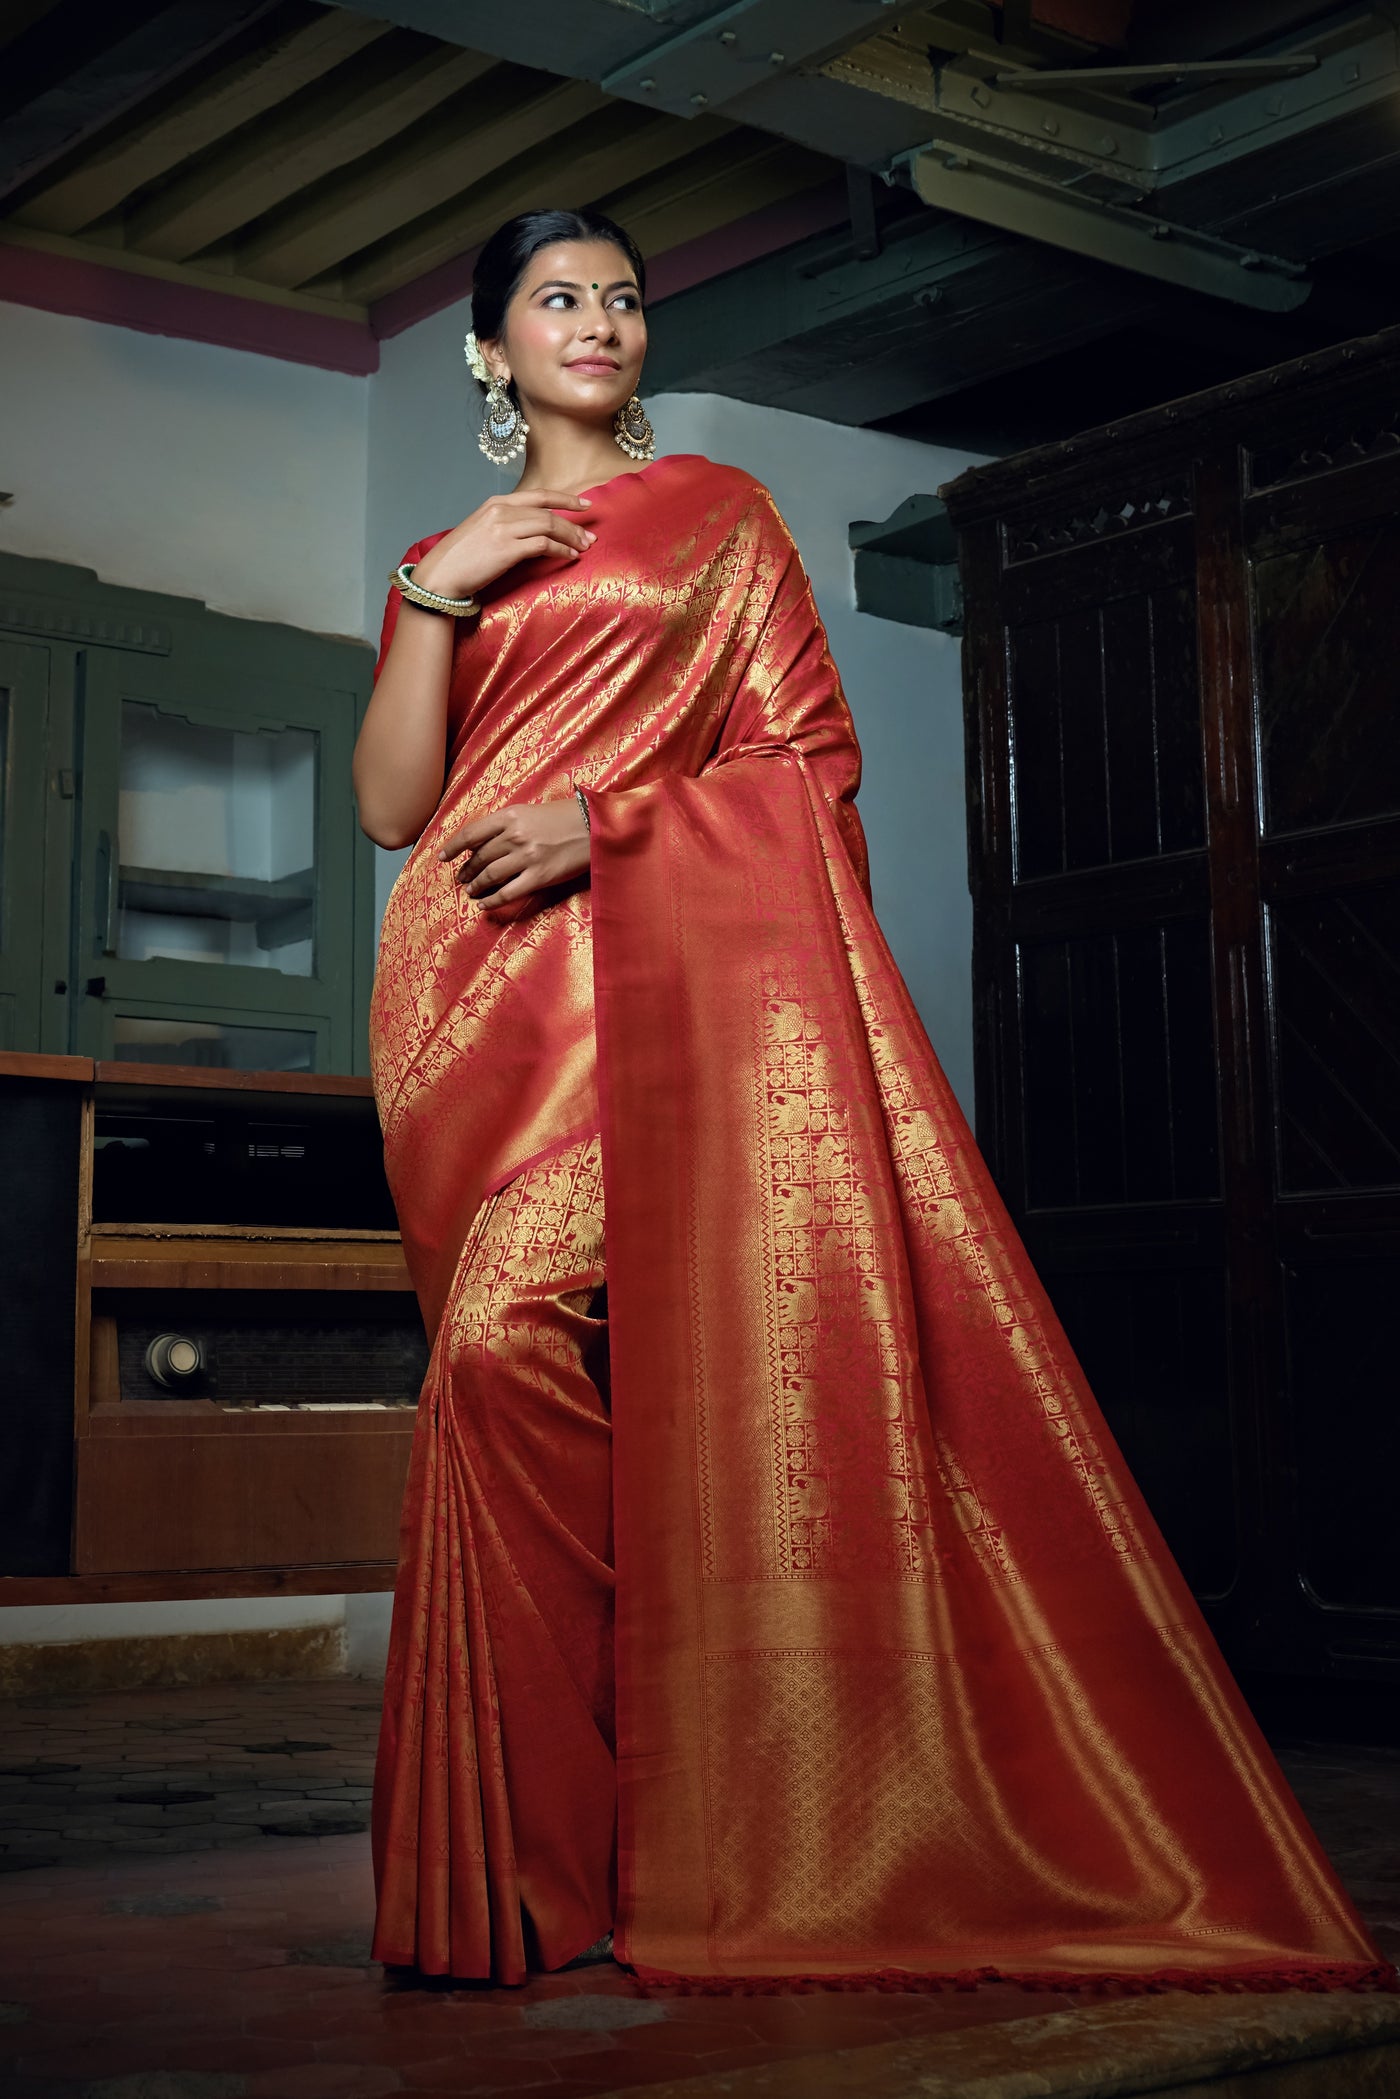 Golden Saree With Red Blouse - Buy Golden Saree With Red Blouse online at  Best Prices in India | Flipkart.com